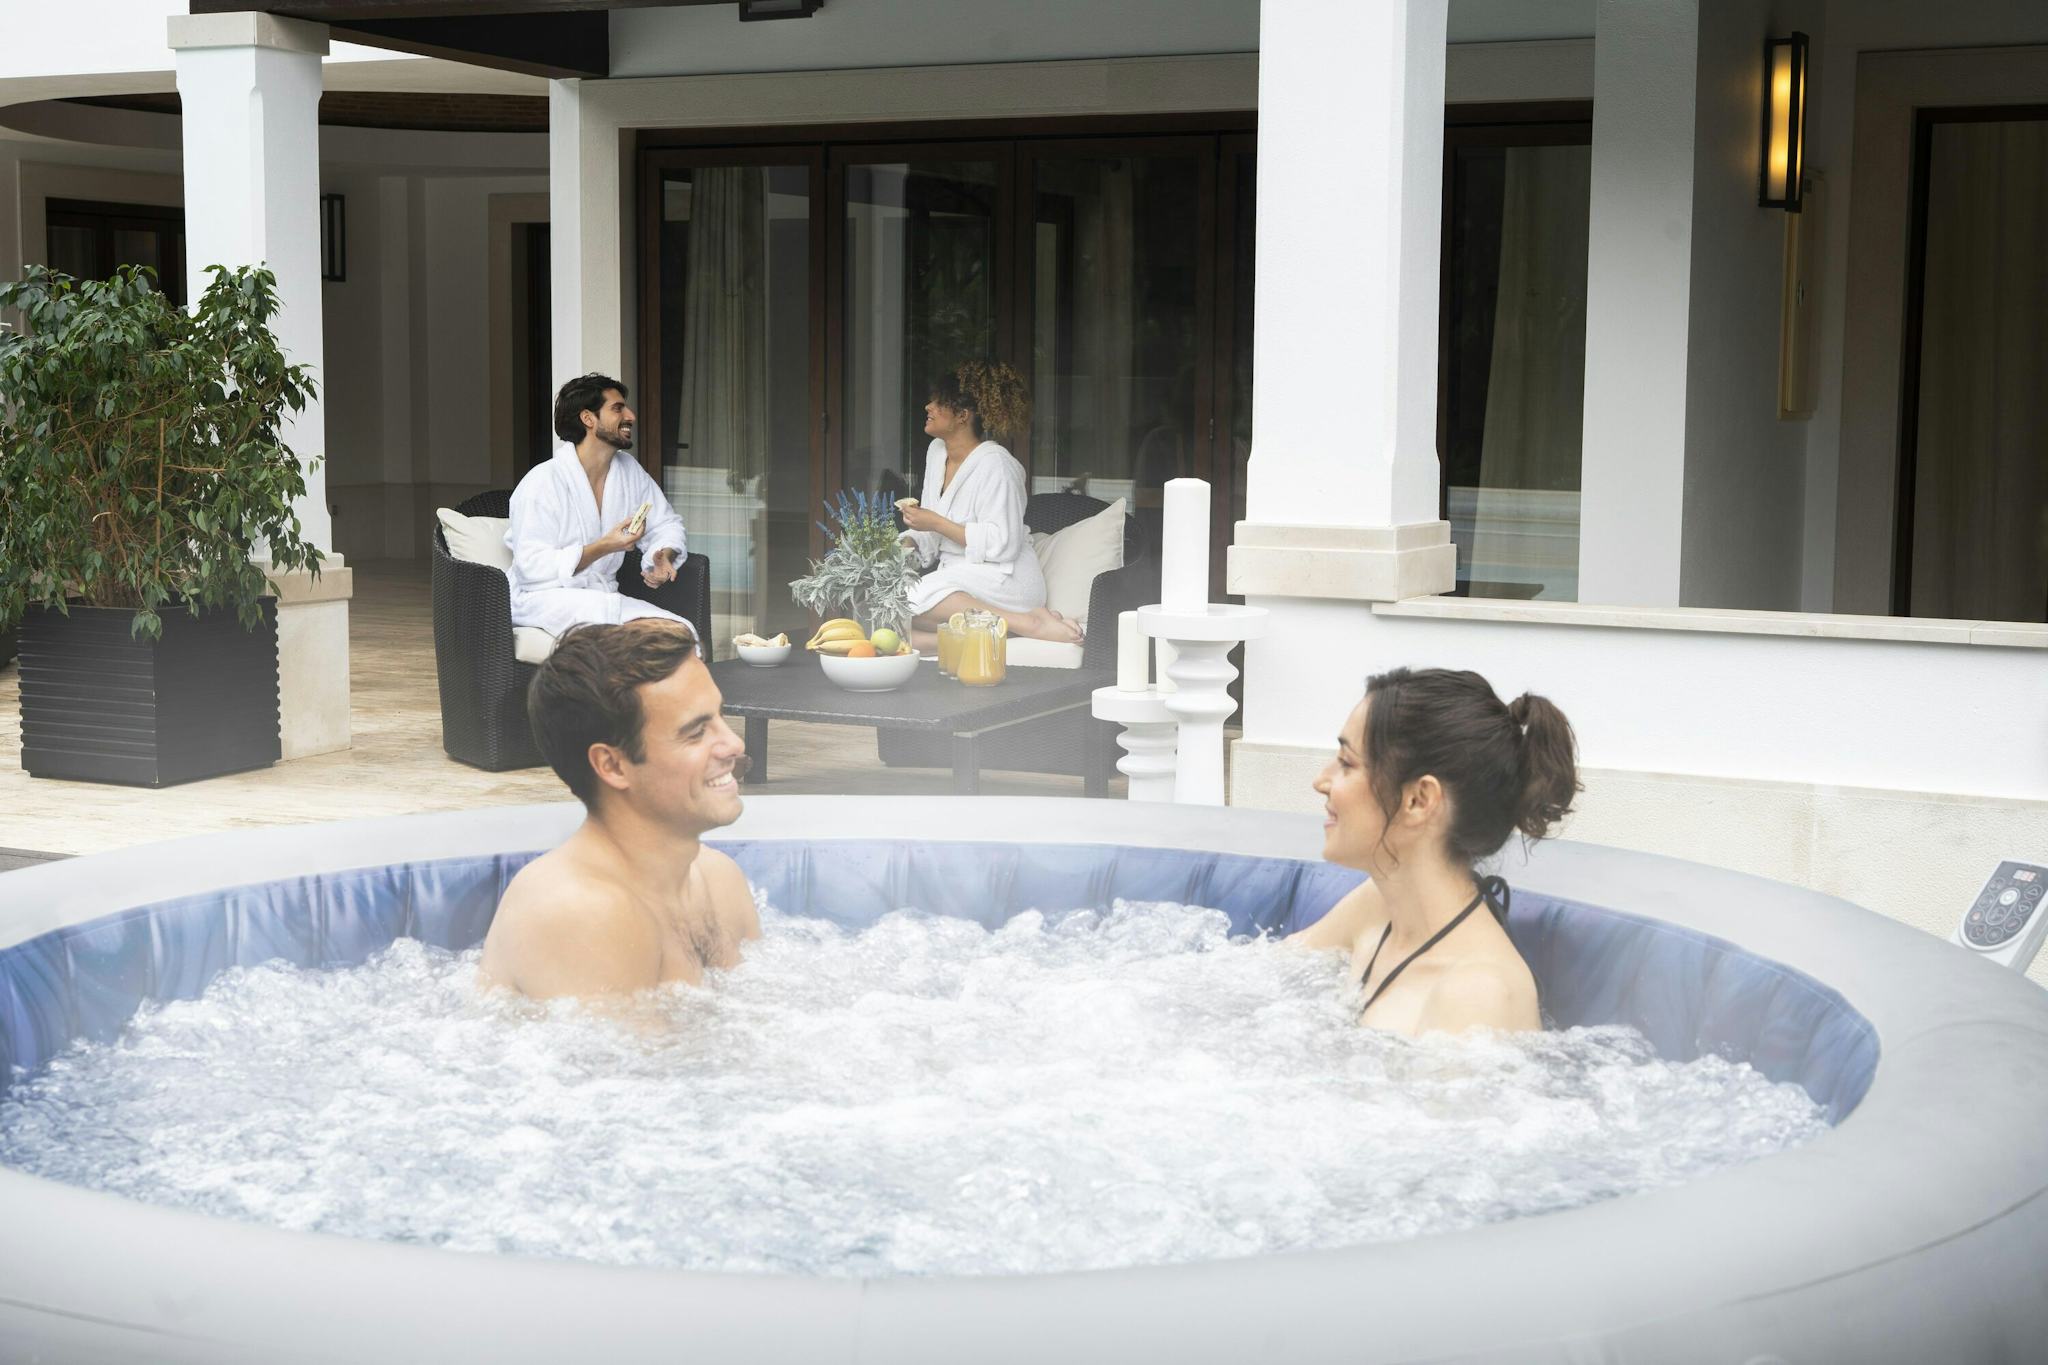 Spas Gonflables Spa gonflable rond Lay-Z-Spa Santorini Hydrojet pro™ 5 - 7 personnes Bestway 14